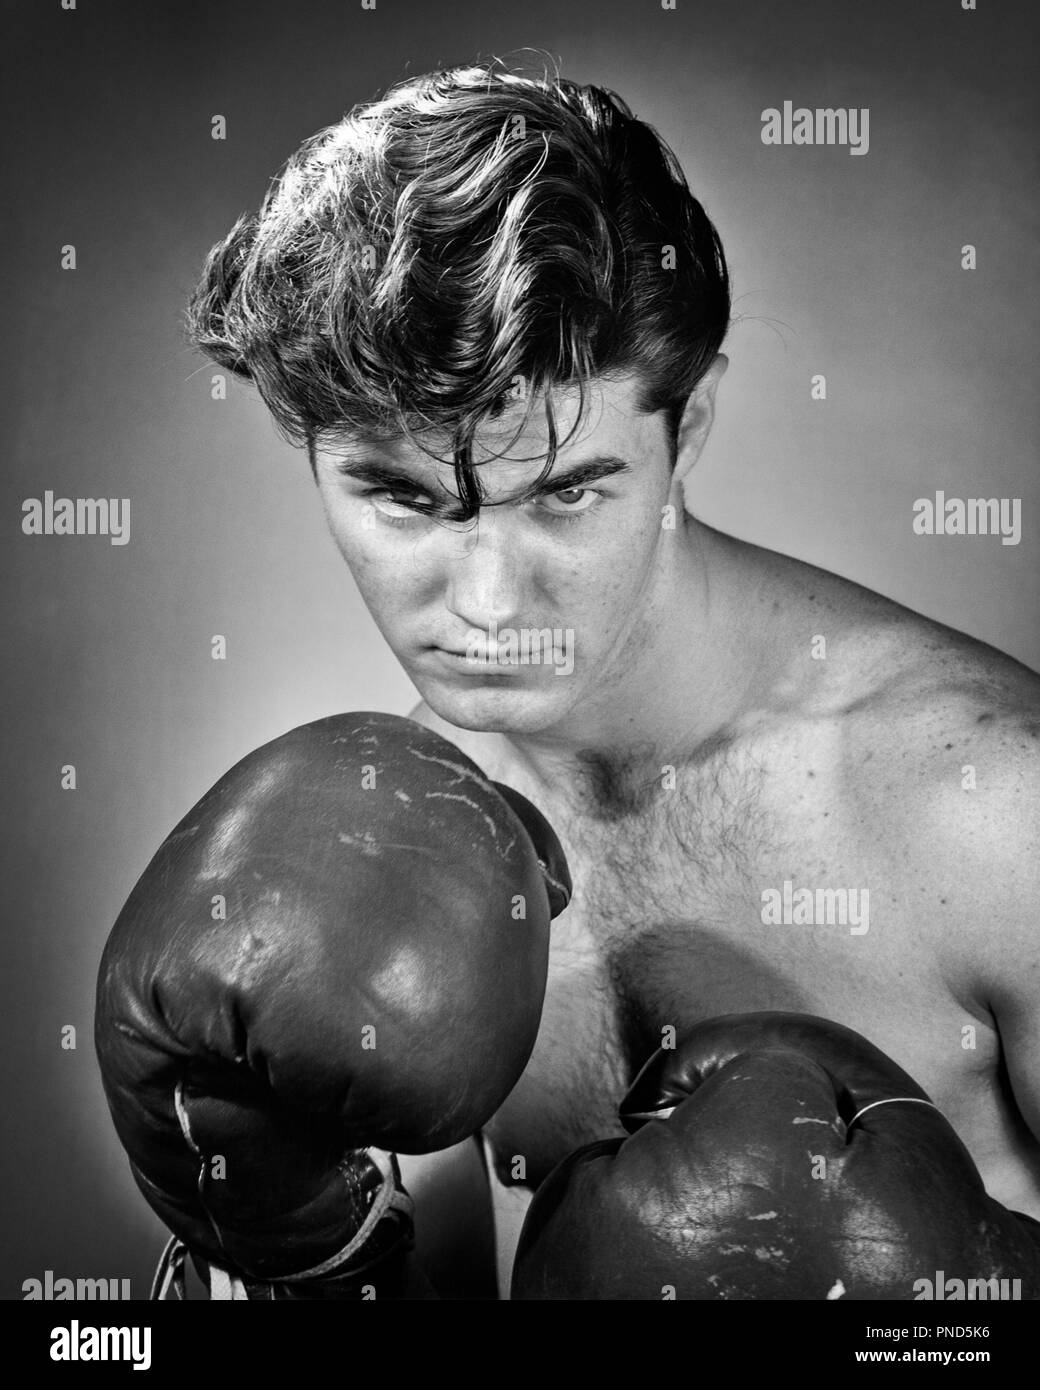 1950s PORTRAIT PRIZE FIGHTER BOXER HAIR FALLING INTO HIS EYES SERIOUS  EXPRESSION LOOKING AT CAMERA - p1830 CLE003 HARS EYE CONTACT MEAN FIGHTER  HEAD AND SHOULDERS STRENGTH COURAGE POISED PRIZE RECREATION INTO